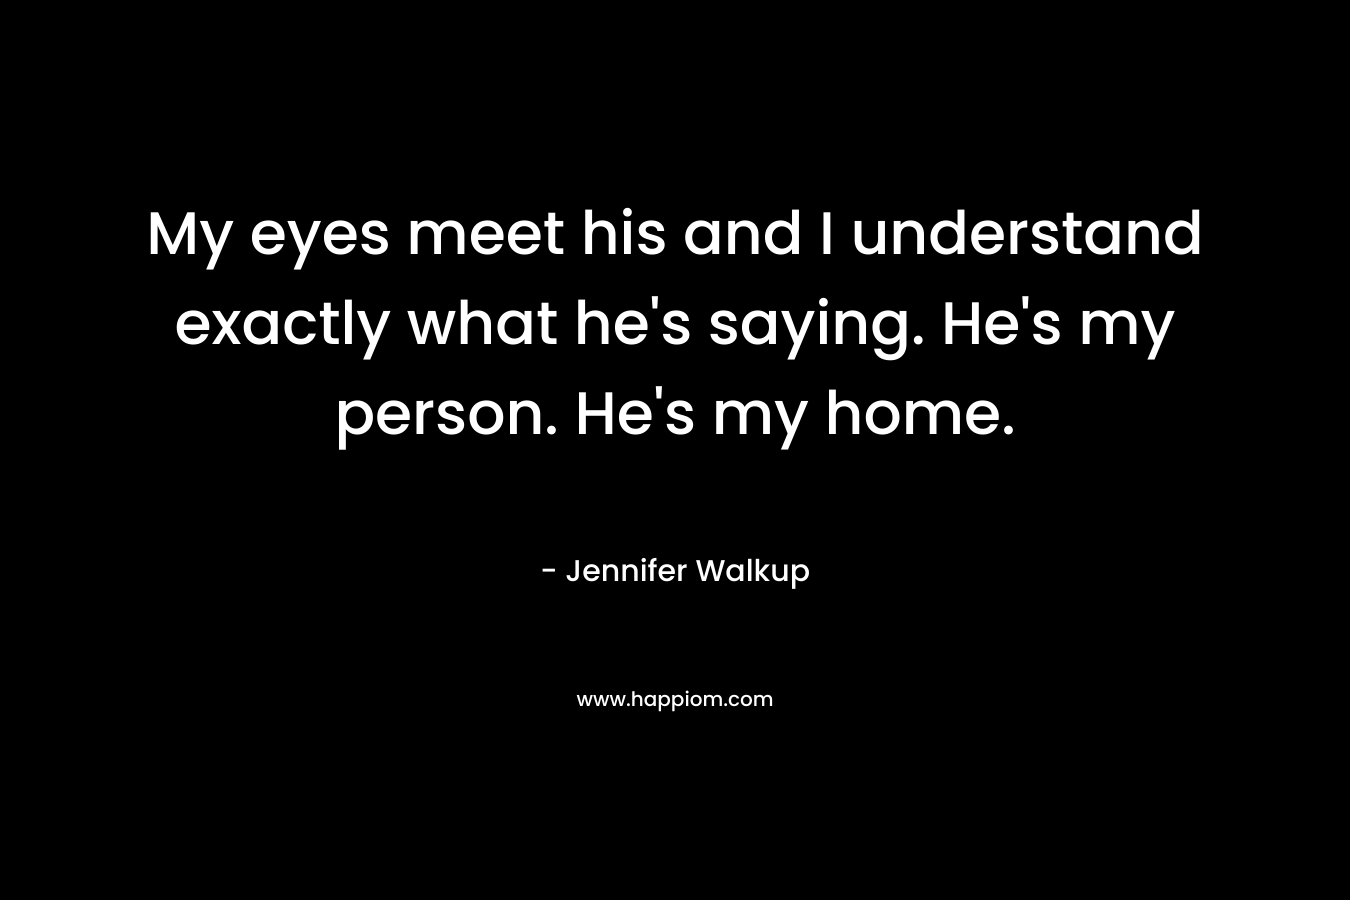 My eyes meet his and I understand exactly what he’s saying. He’s my person. He’s my home. – Jennifer Walkup